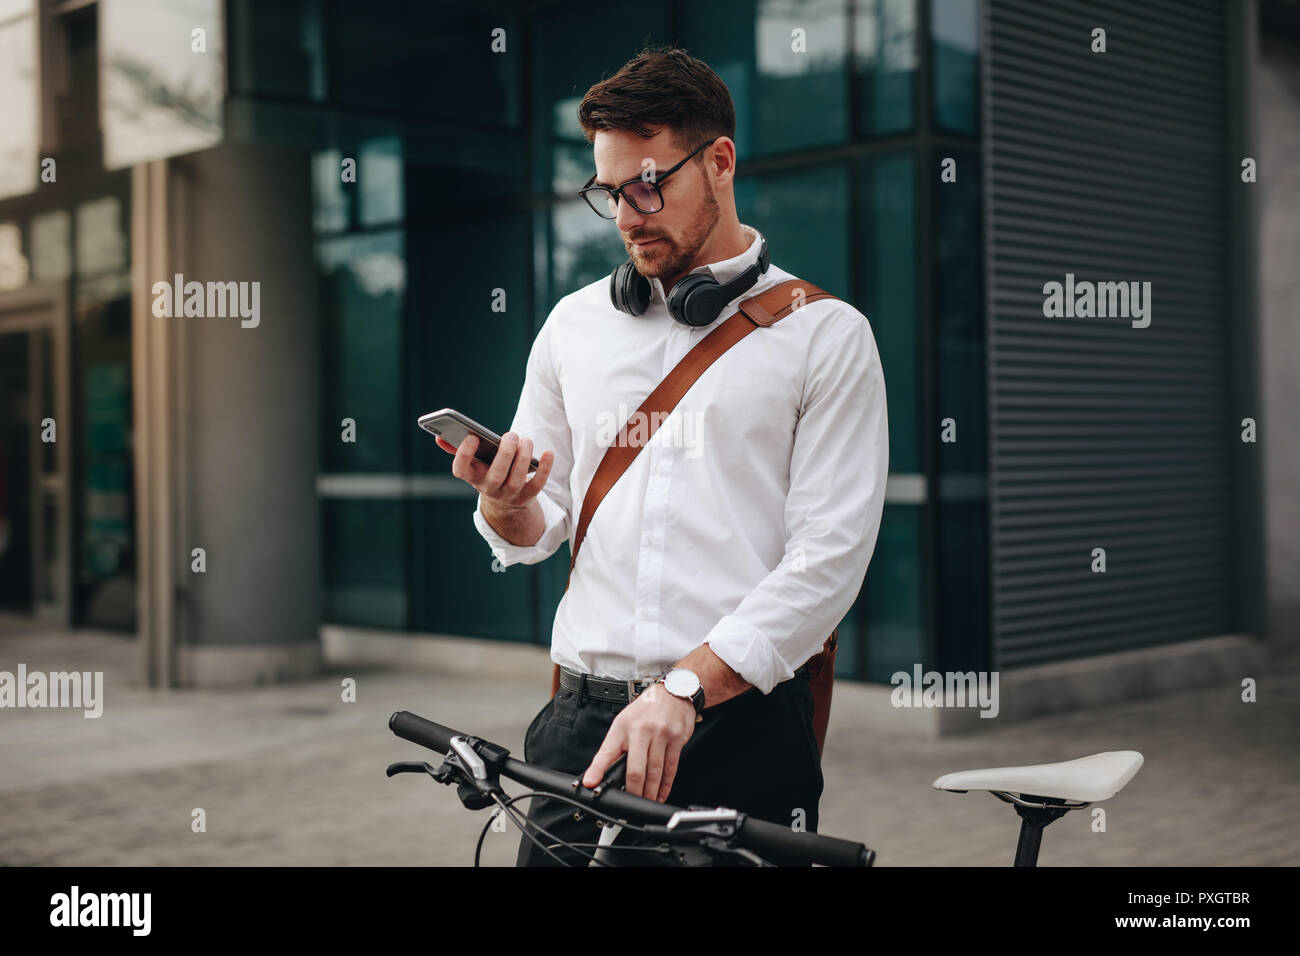 Man checking his mobile phone standing on street with his bicycle while commuting to office. Businessman using mobile phone while going to office. Stock Photo